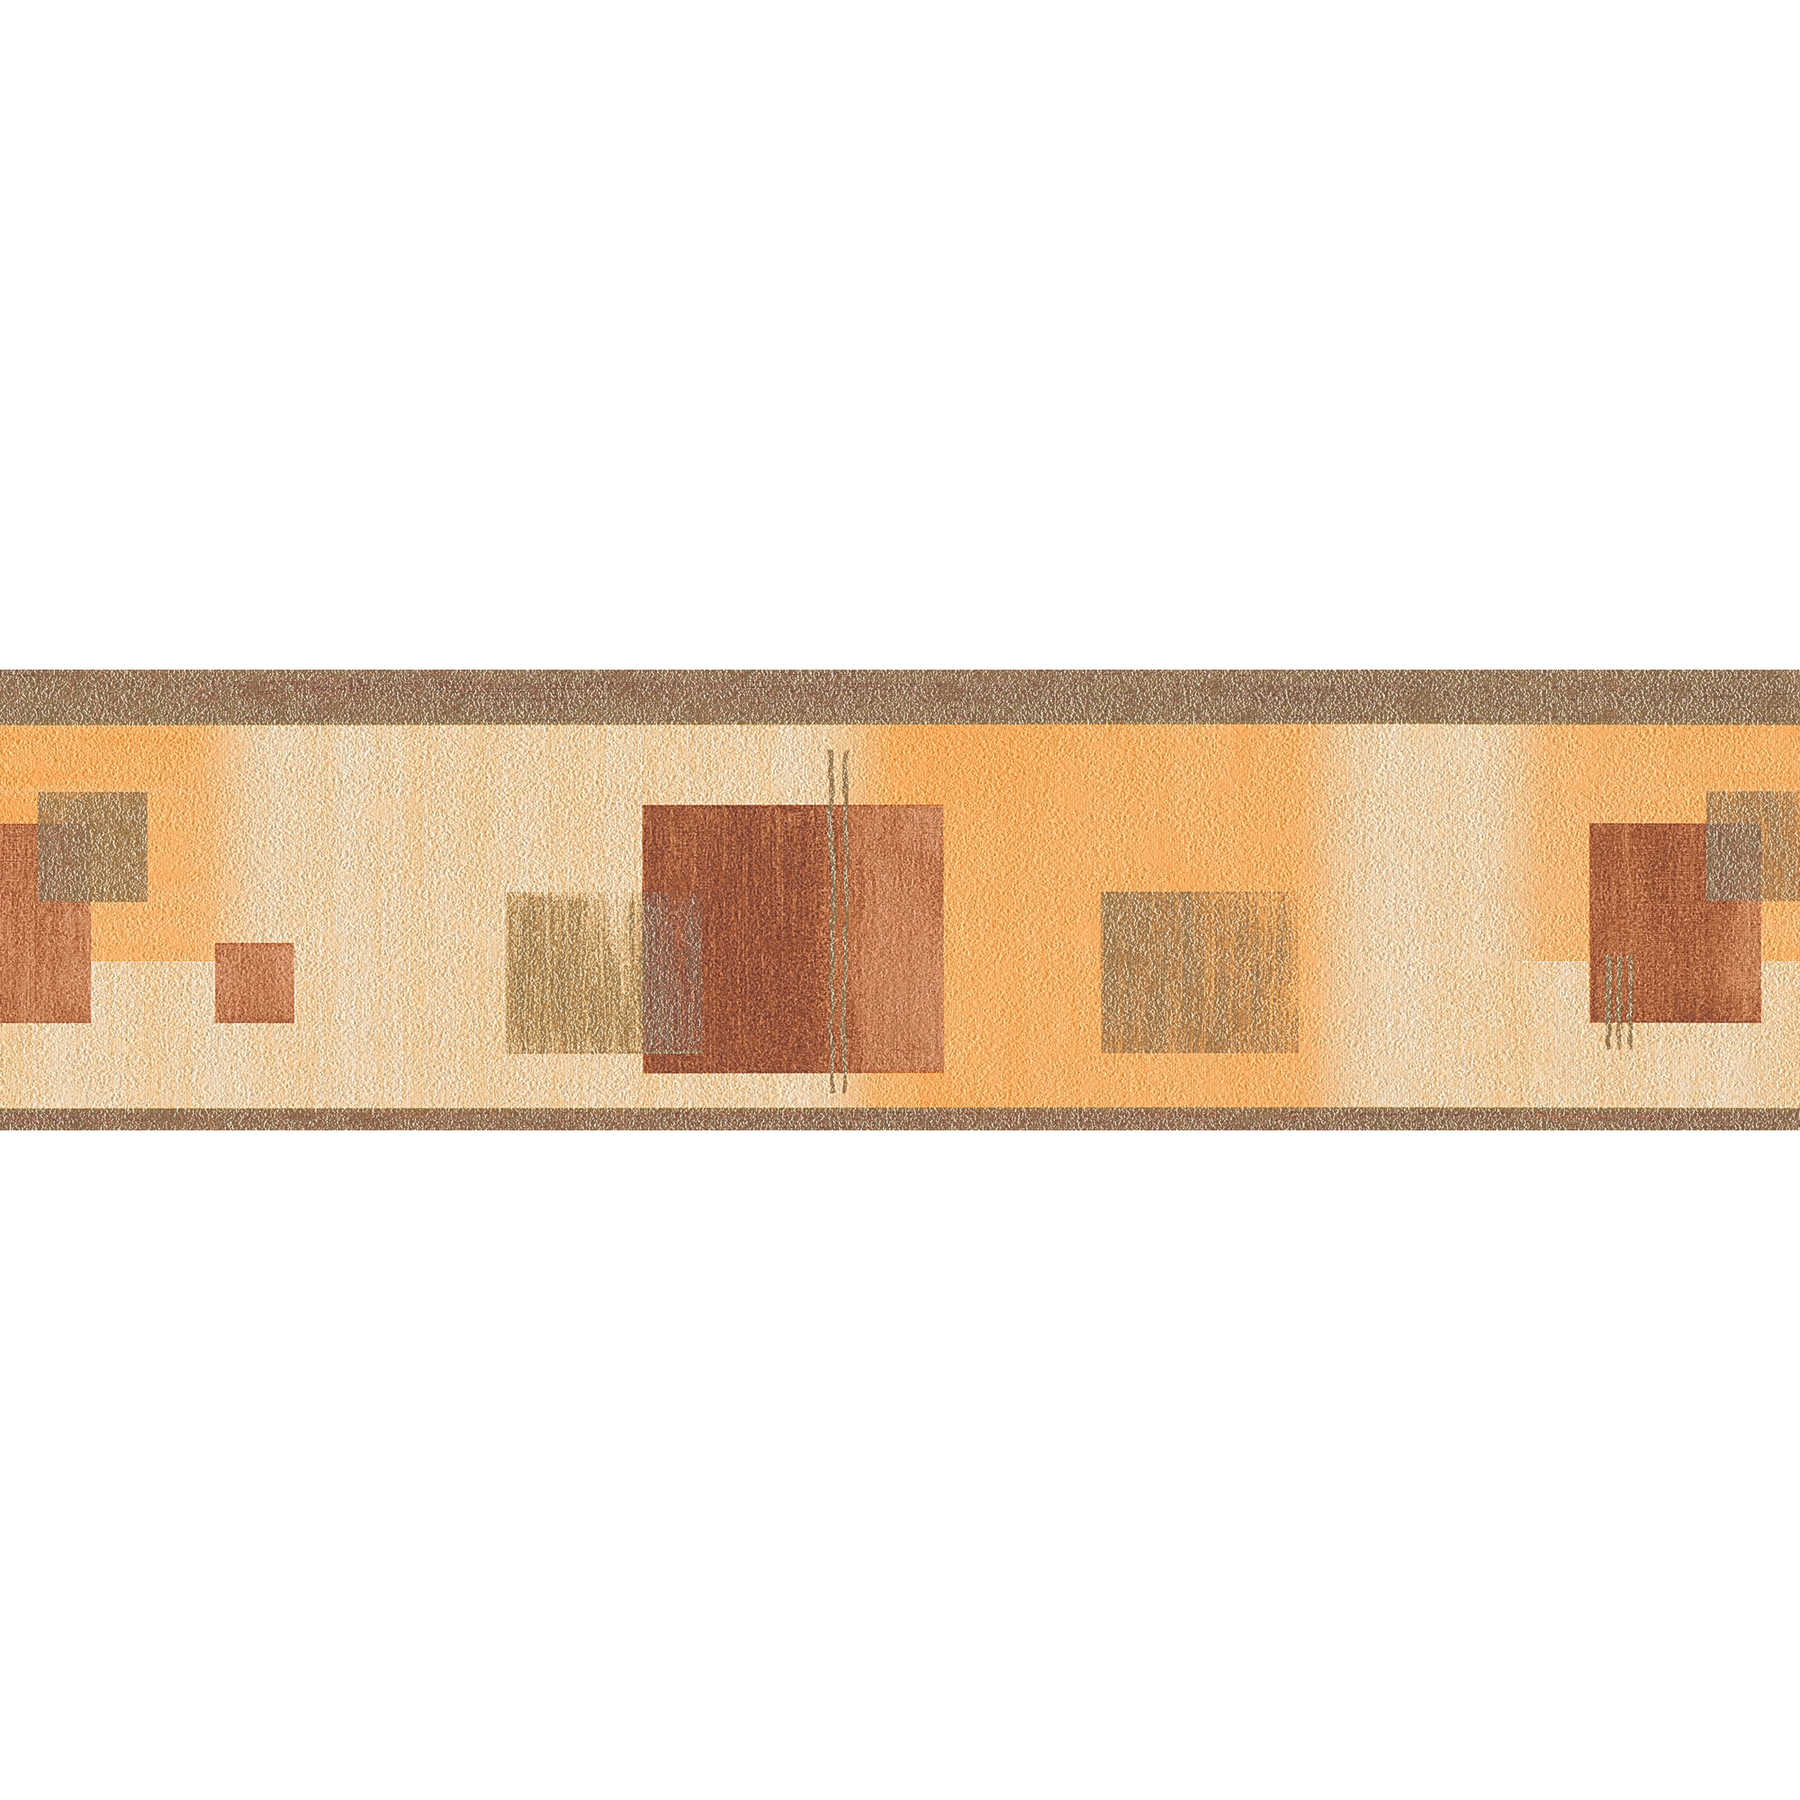         Abstract wallpaper border with metallic accents - orange, brown
    